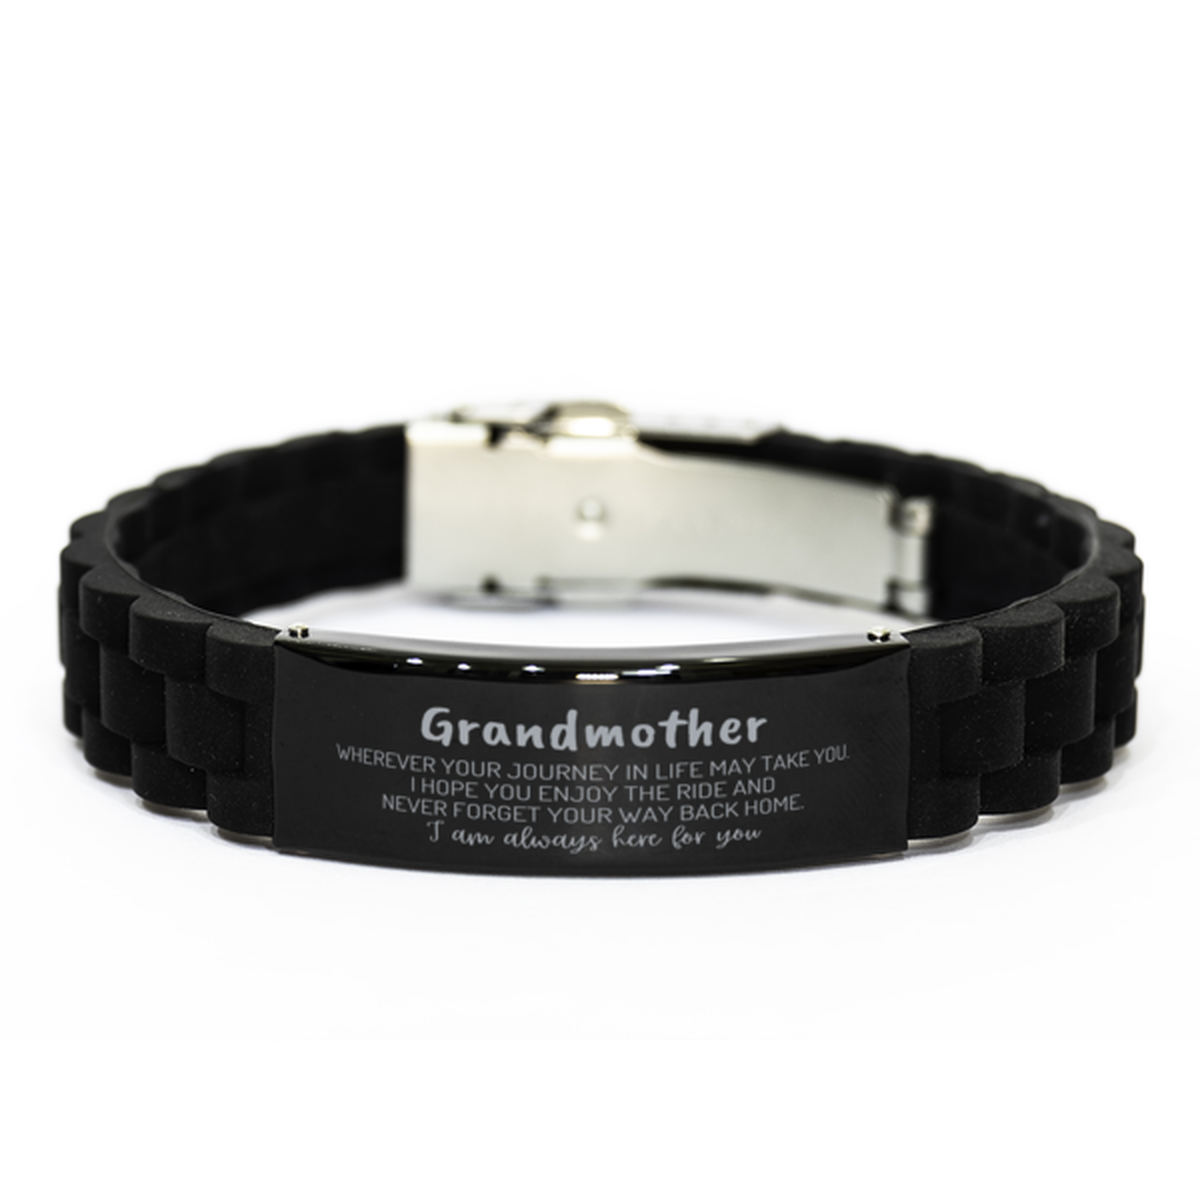 Grandmother wherever your journey in life may take you, I am always here for you Grandmother Black Glidelock Clasp Bracelet, Awesome Christmas Gifts For Grandmother, Grandmother Birthday Gifts for Men Women Family Loved One